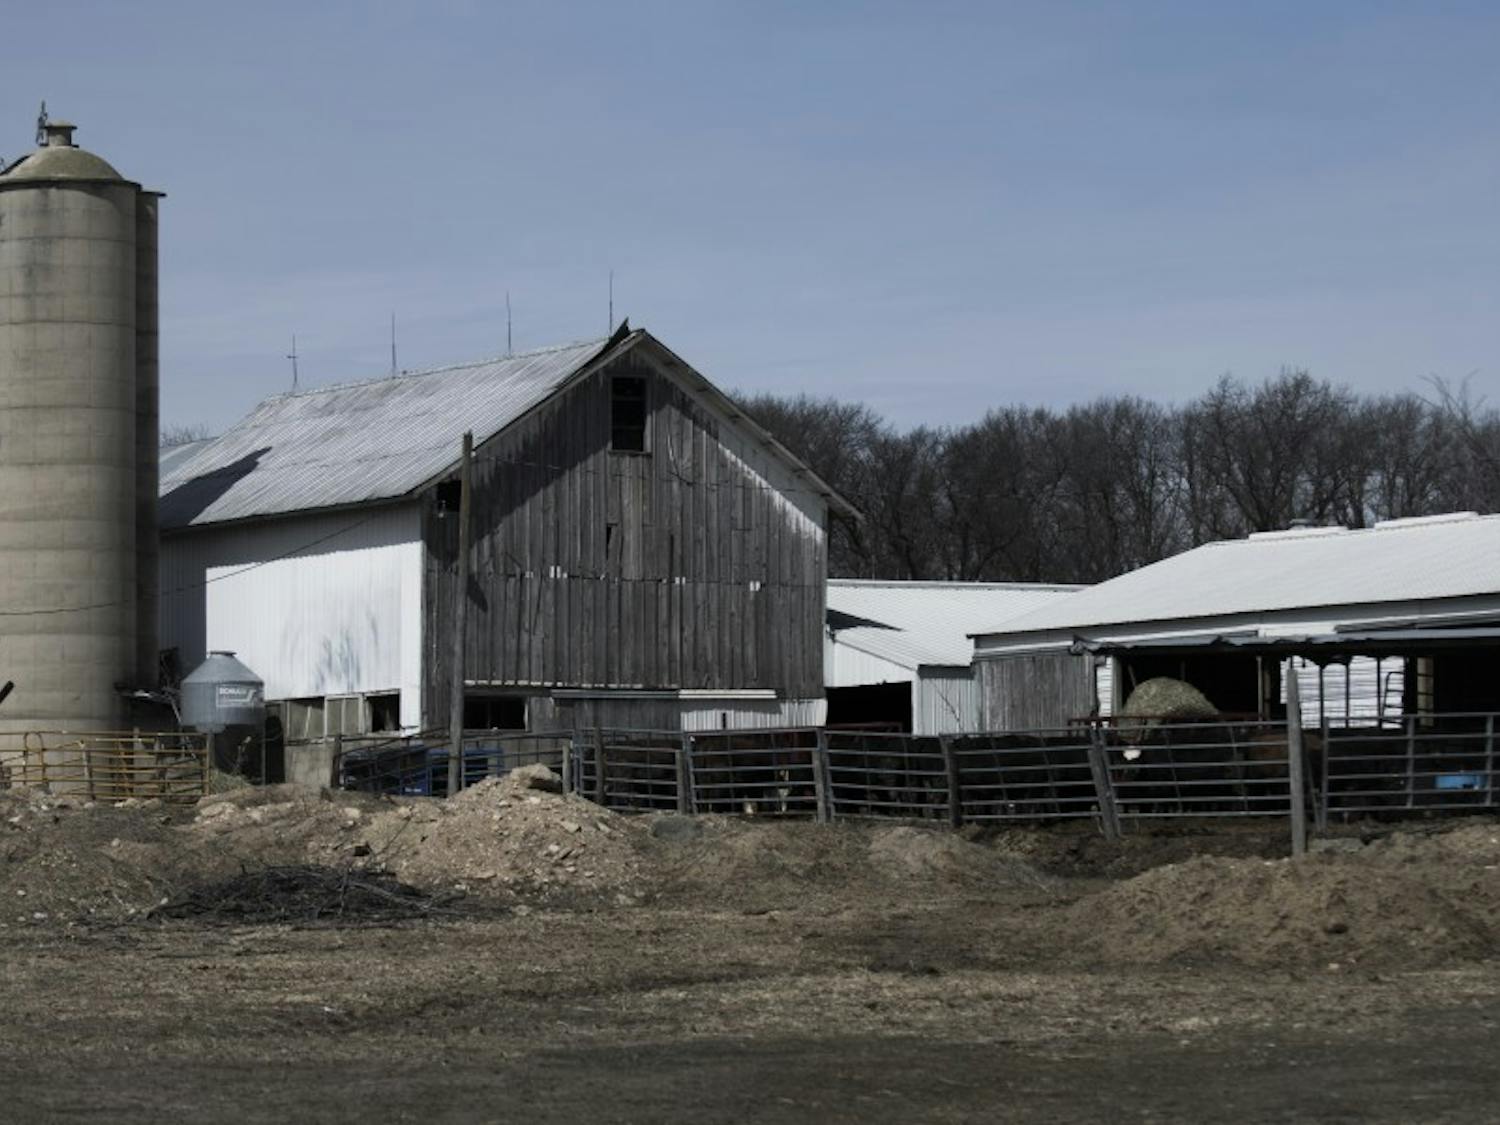 Across Wisconsin, economic downturn means farms like the Bauman's are shrinking.&nbsp;In 2017, the number of farms in the state shrunk, but their average area increased &mdash; indicating that many have consolidated.